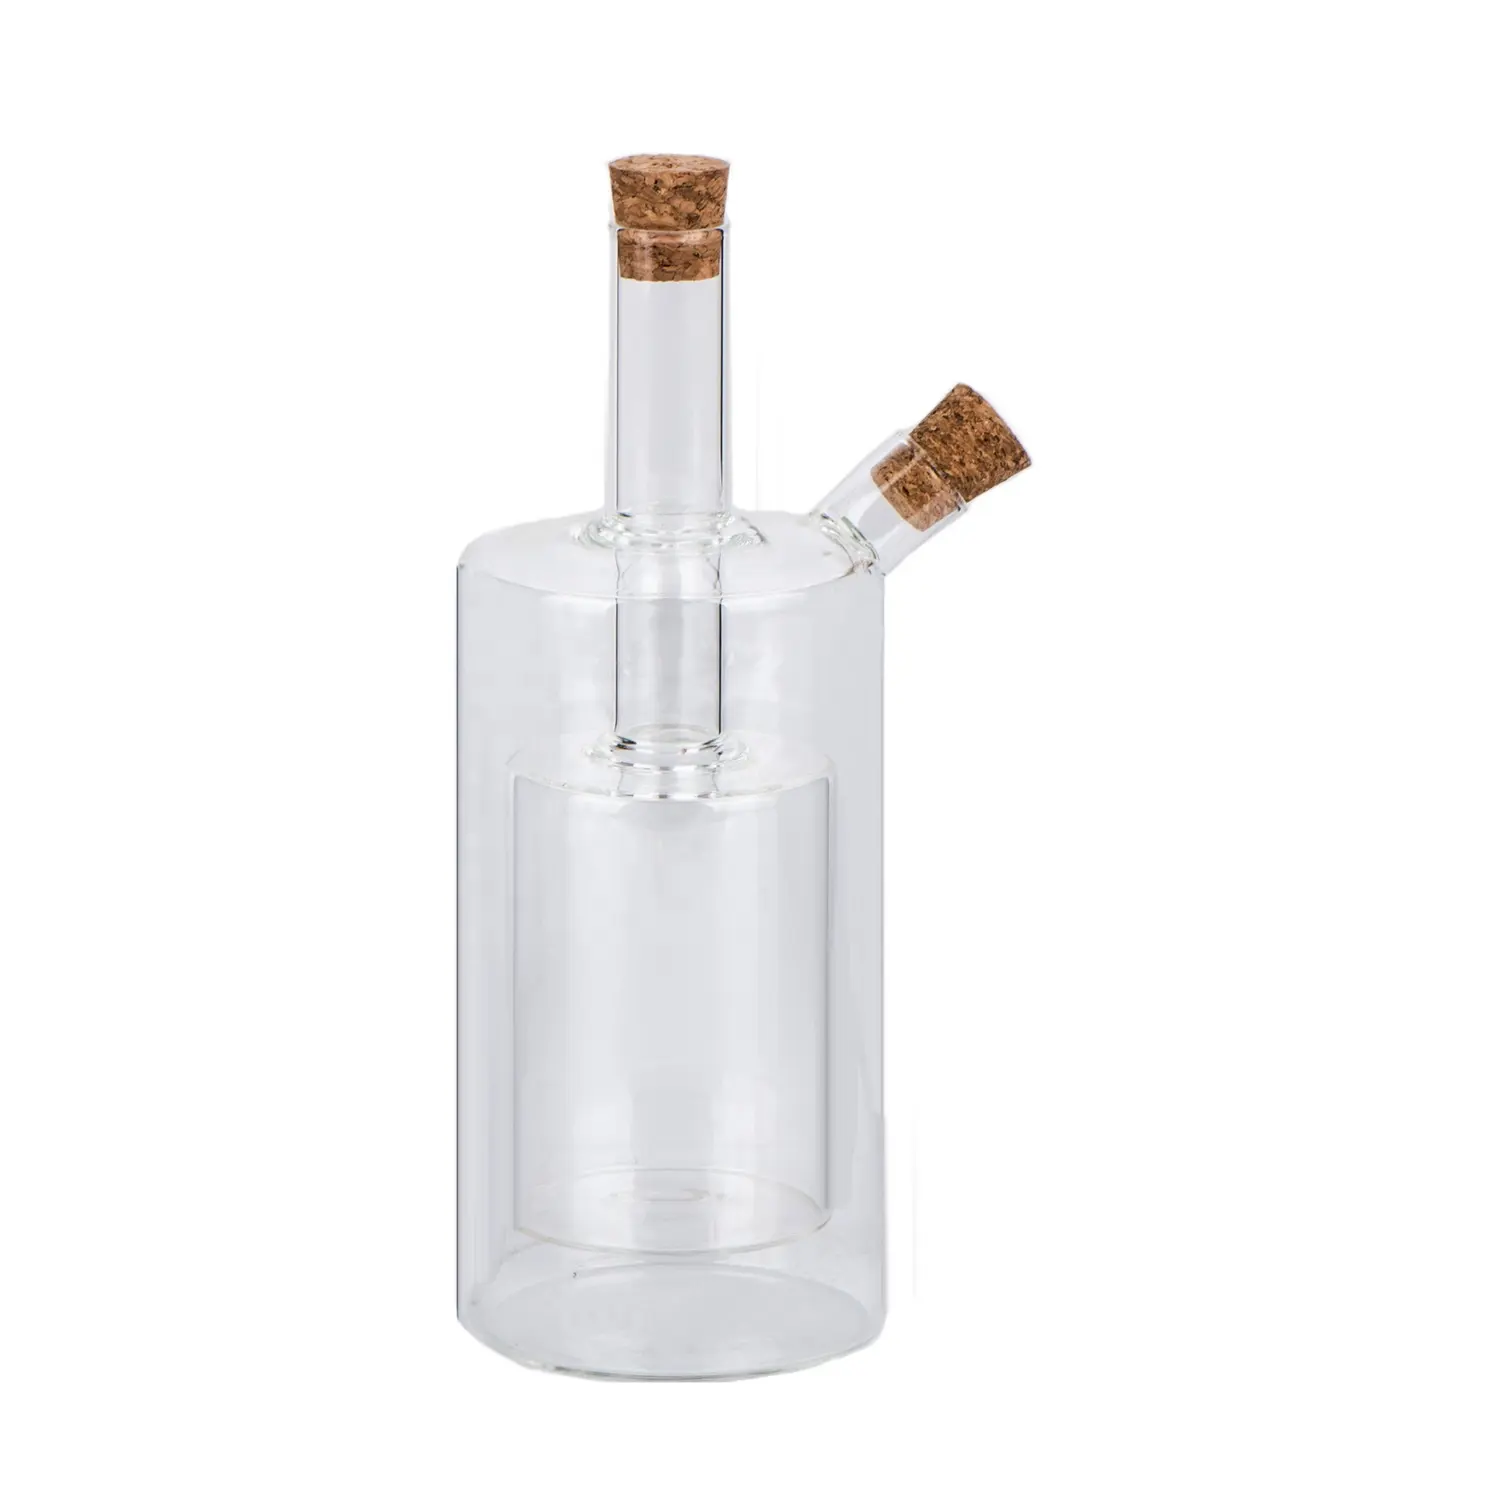 Double mouth 2 in 1 High Borosilicate Glass Oil and Vinegar Bottle with Cork Lid